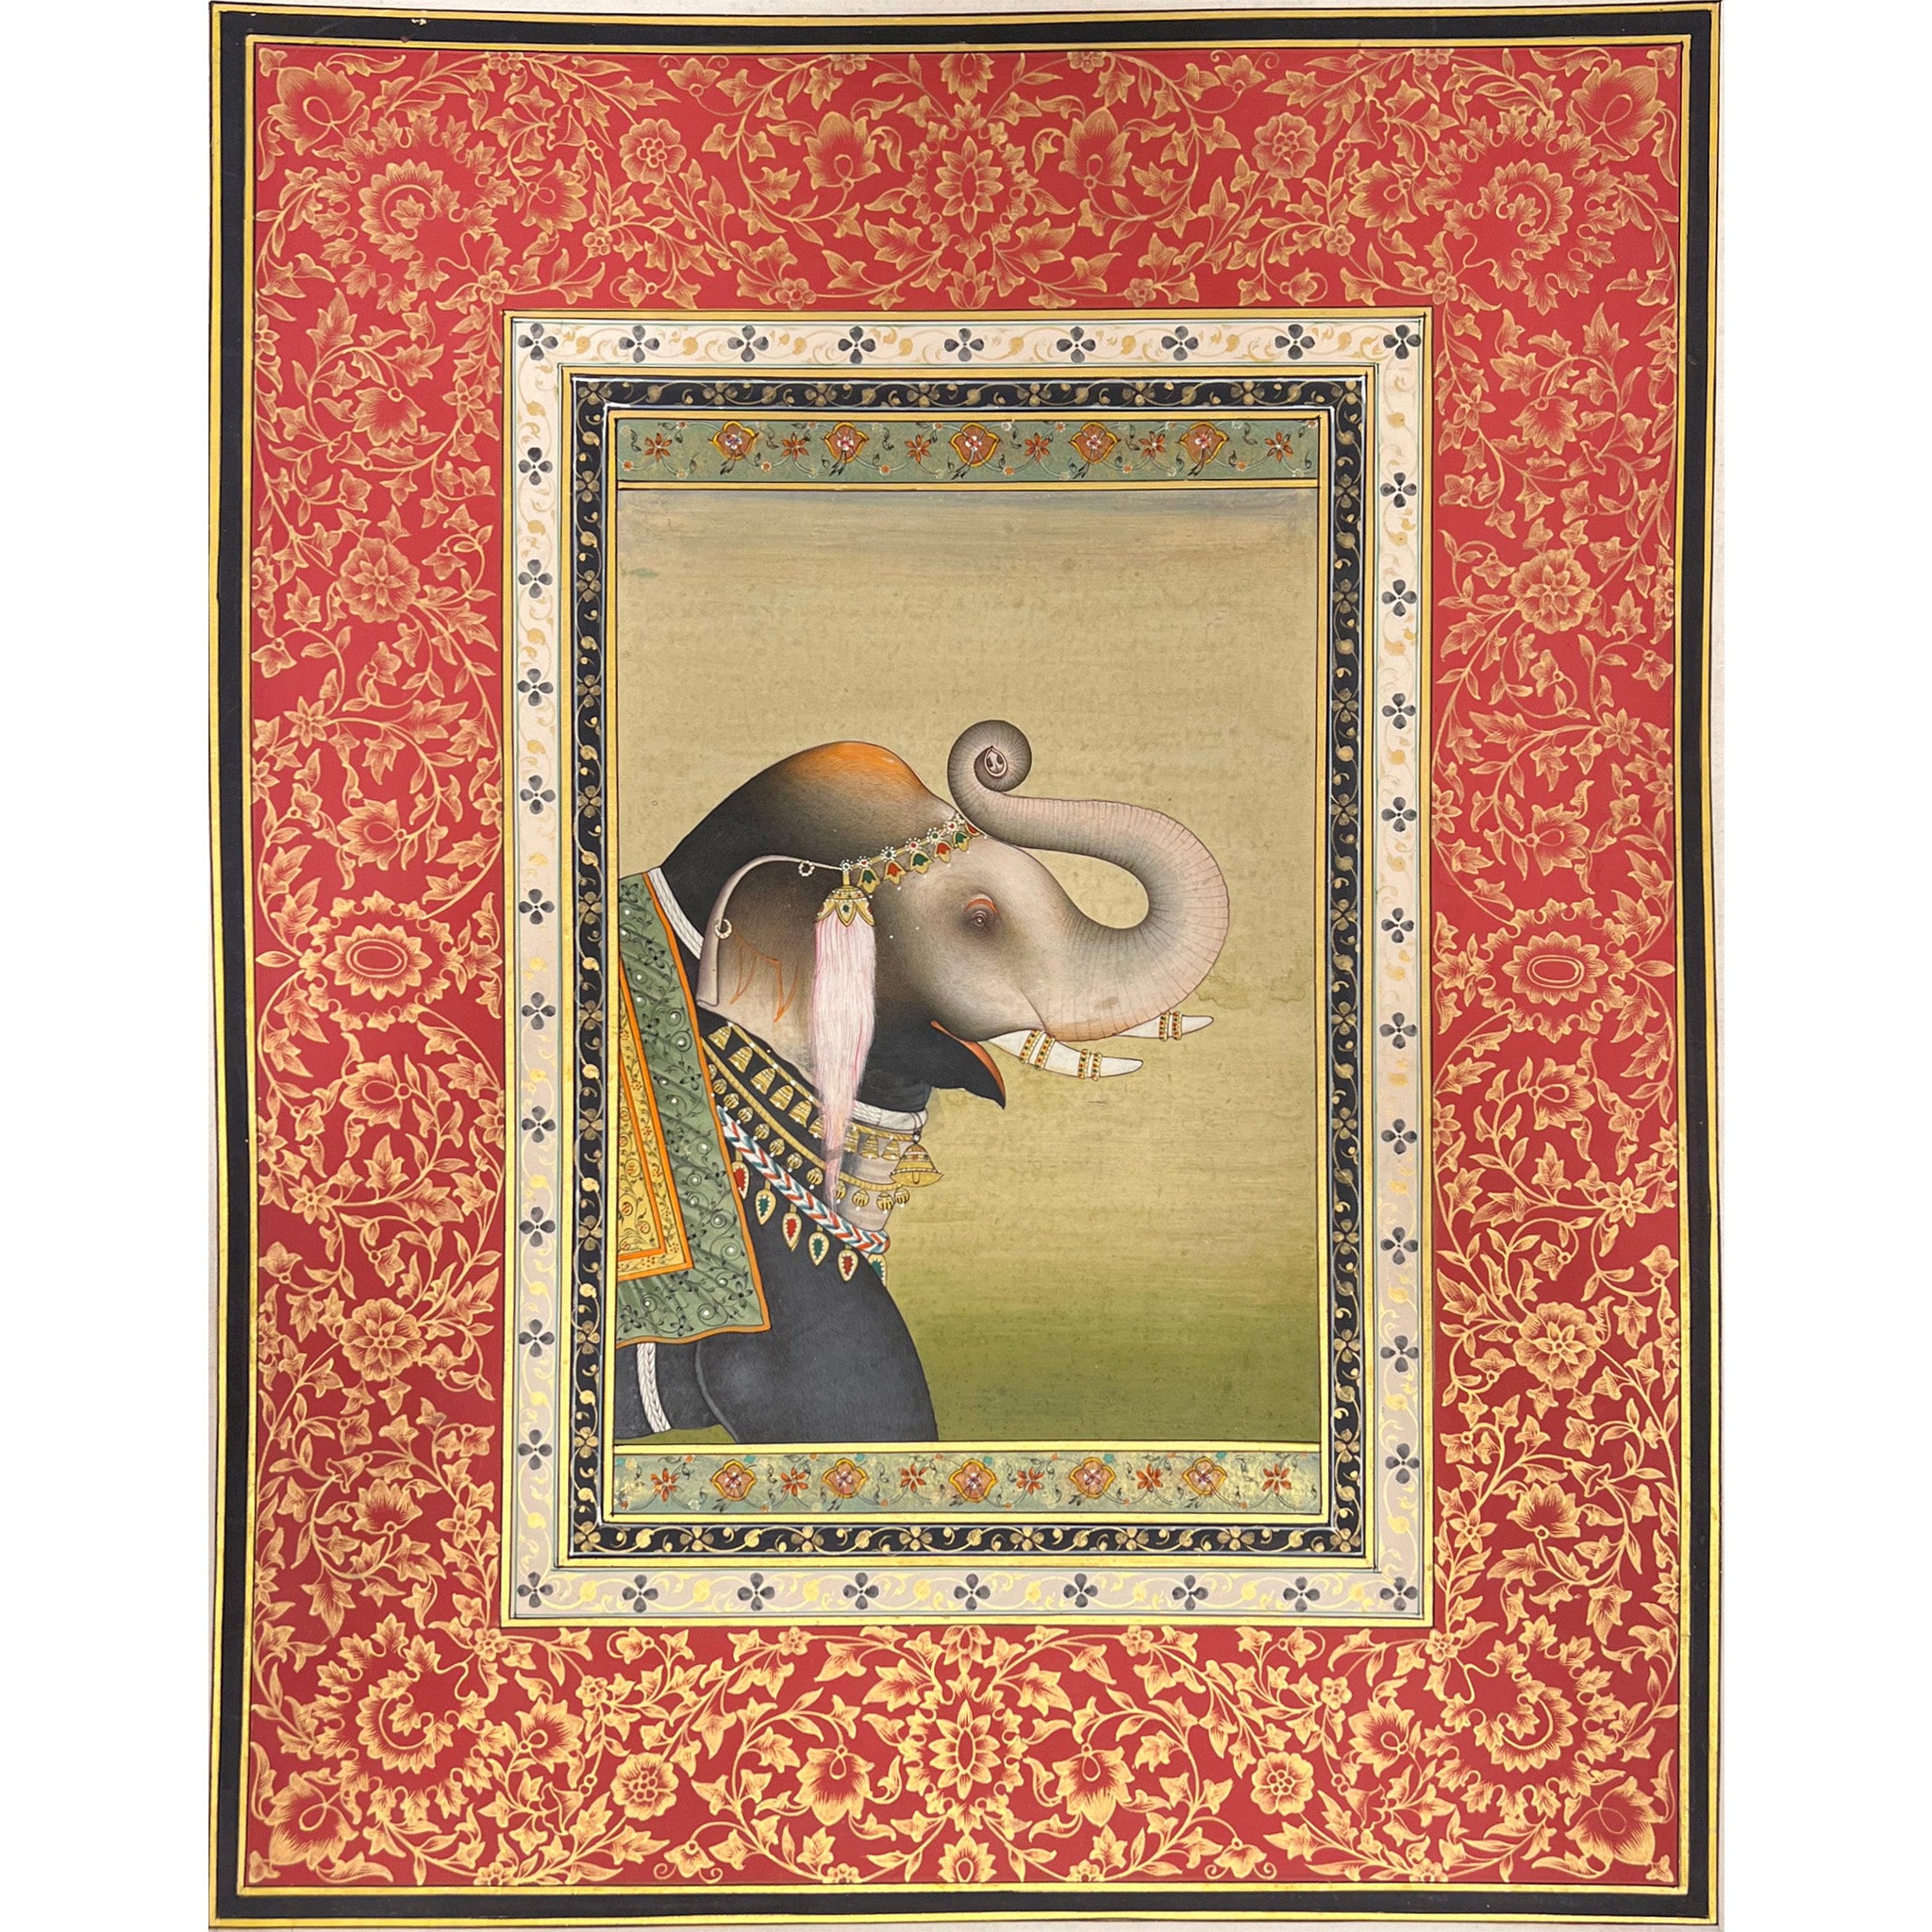 Pair of Elephant Paintings with Gold Filligree Border